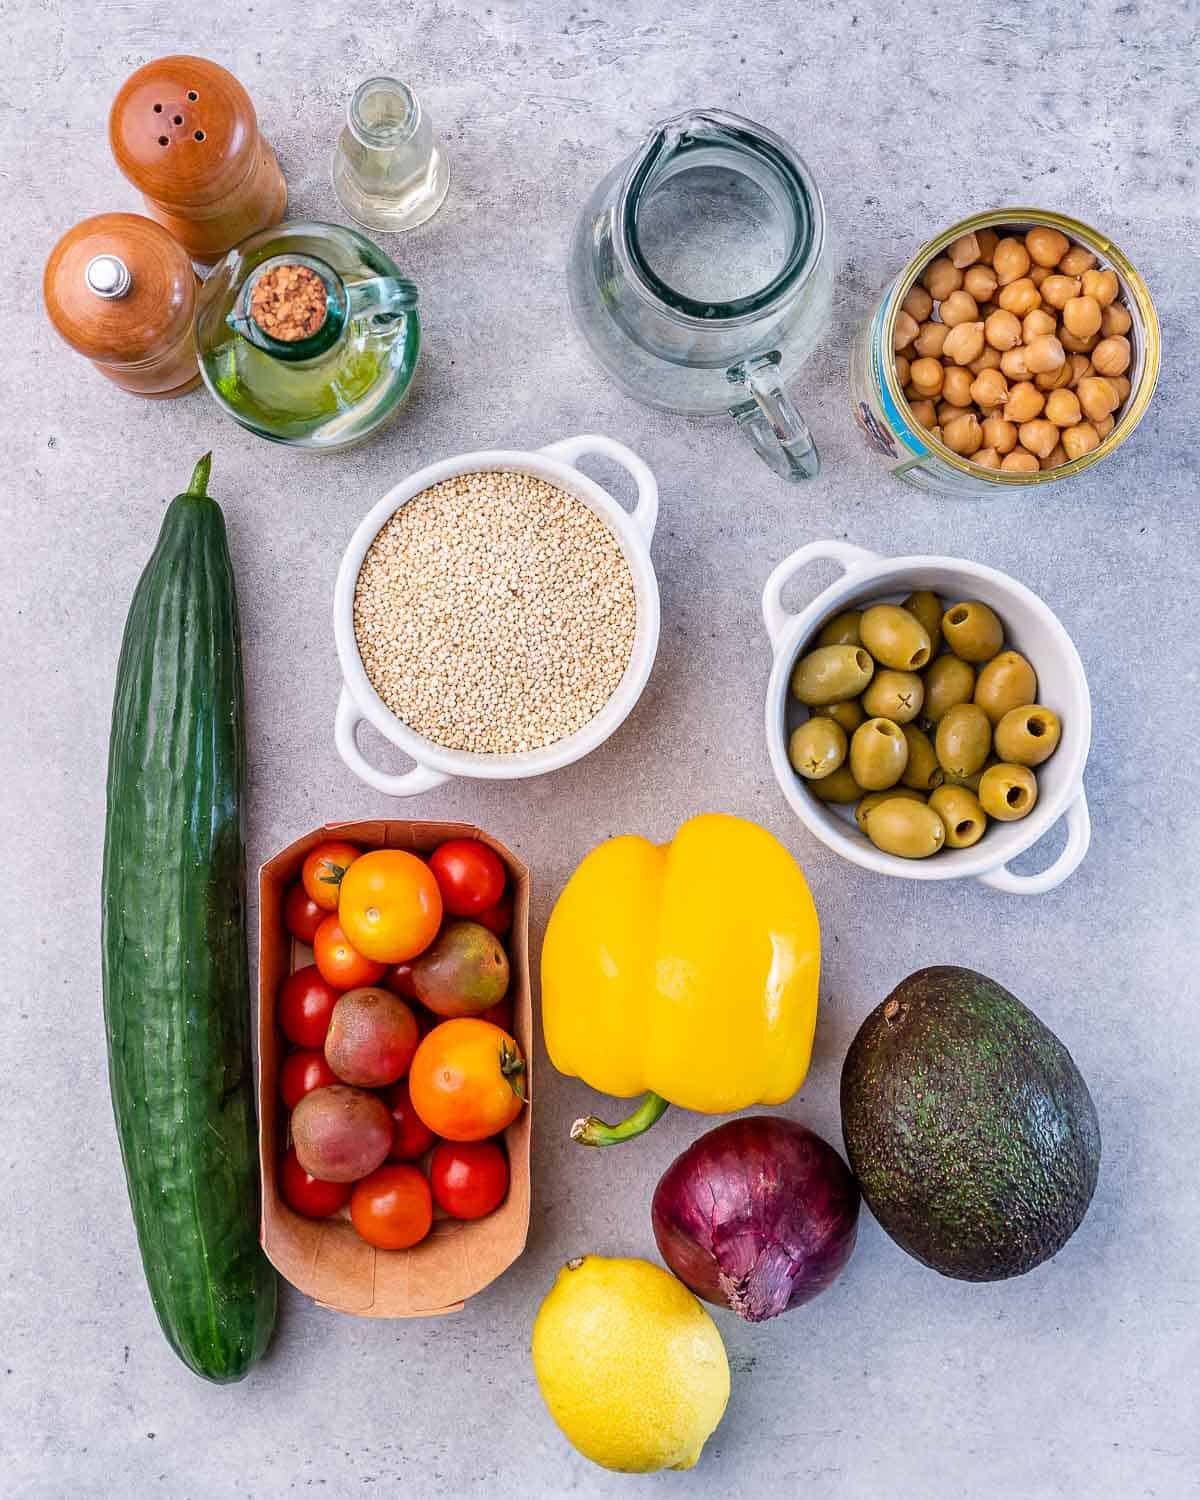 A bowl of uncooked quinoa near a cucumber, cherry tomatoes, an avocado, onion, bell pepper, a lemon and a bowl of green olives.